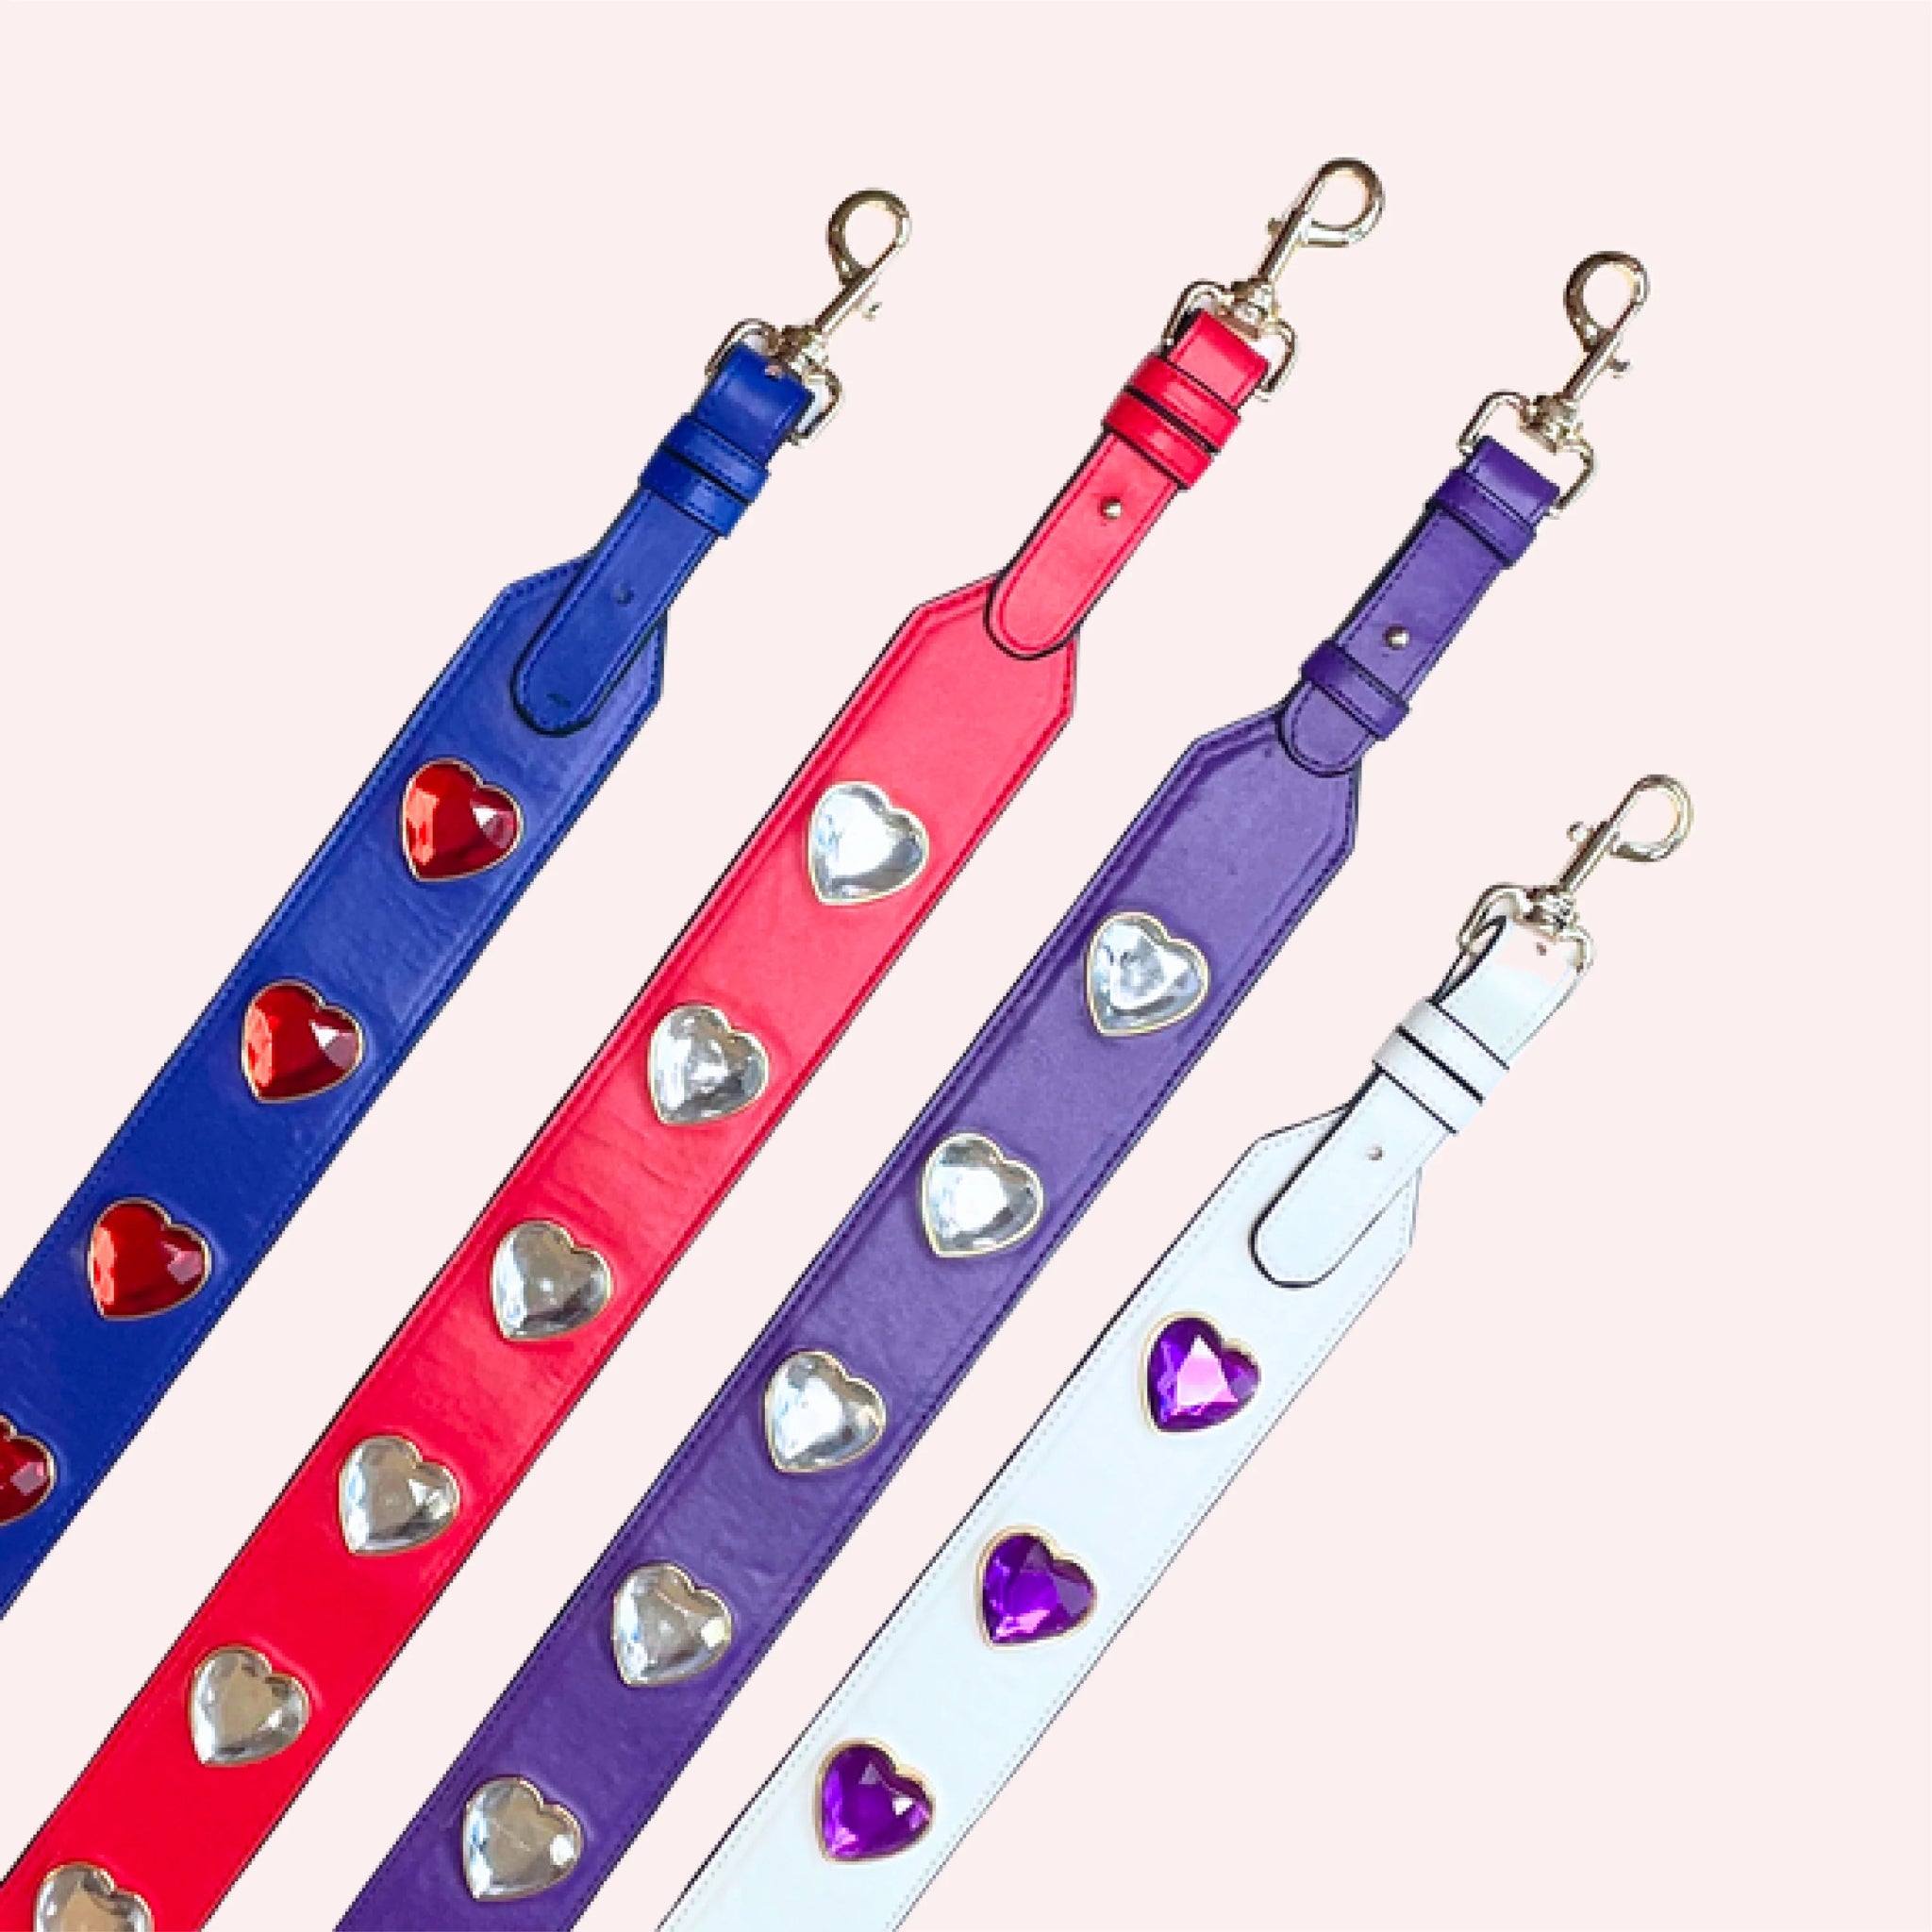 Crystal Heart Bag Strap Purple + Clear Bag - By Jenna Lee - Color Game